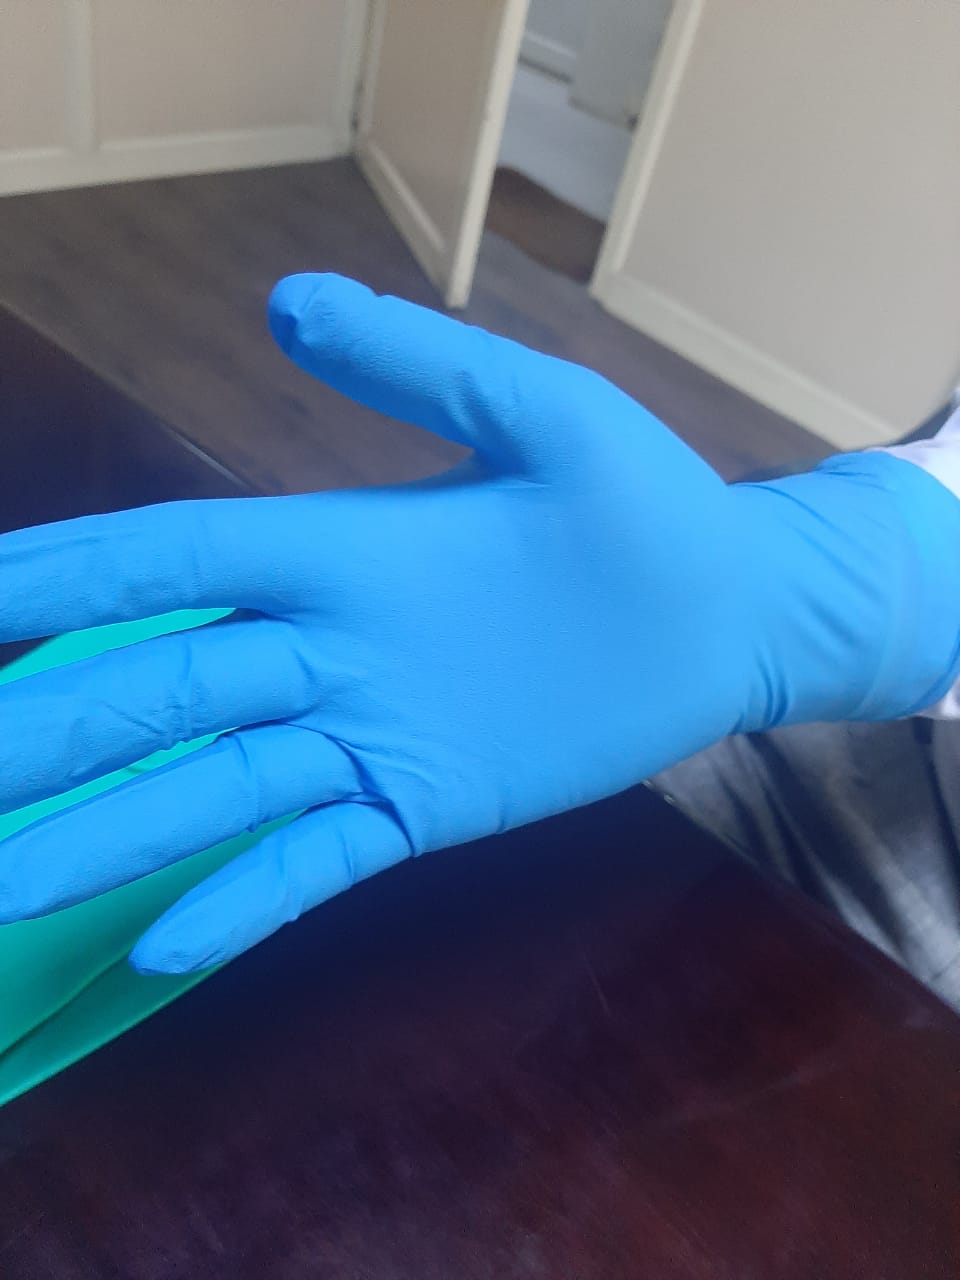 Factors To Consider When Choosing Nitrile Exam Gloves